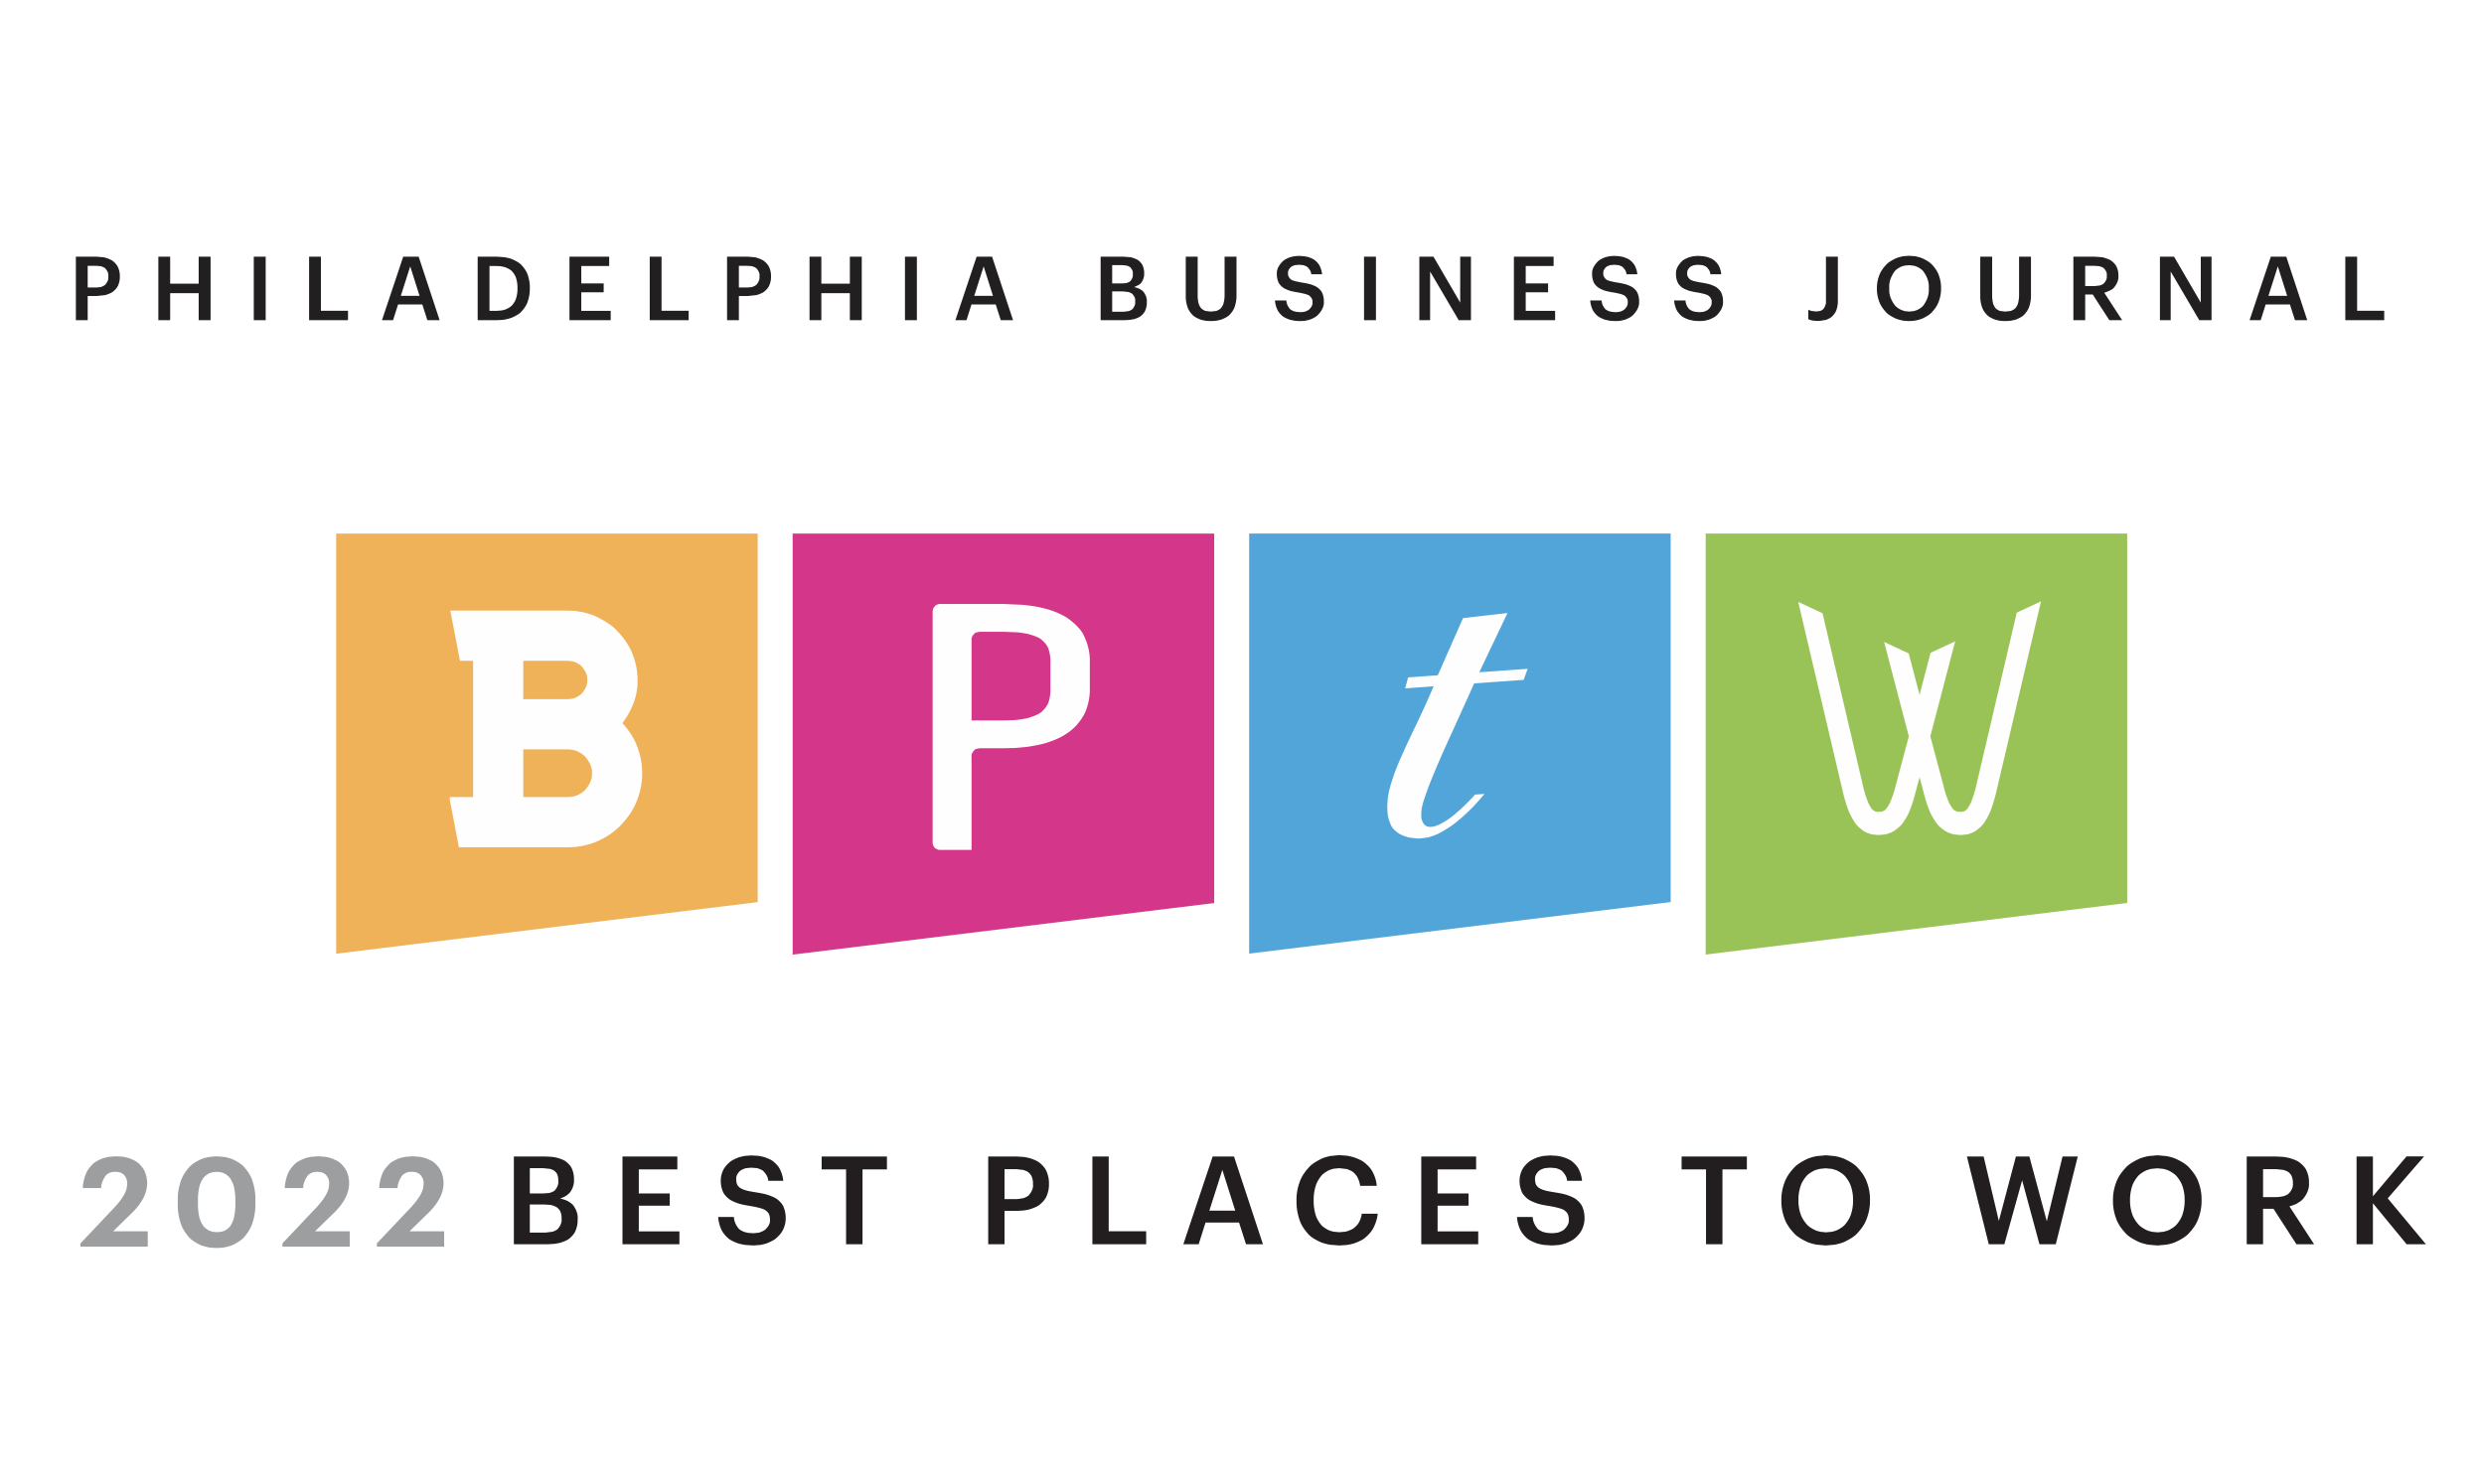 Clark Capital Management Group Named 2022 Best Place to Work by Philadelphia Business Journal